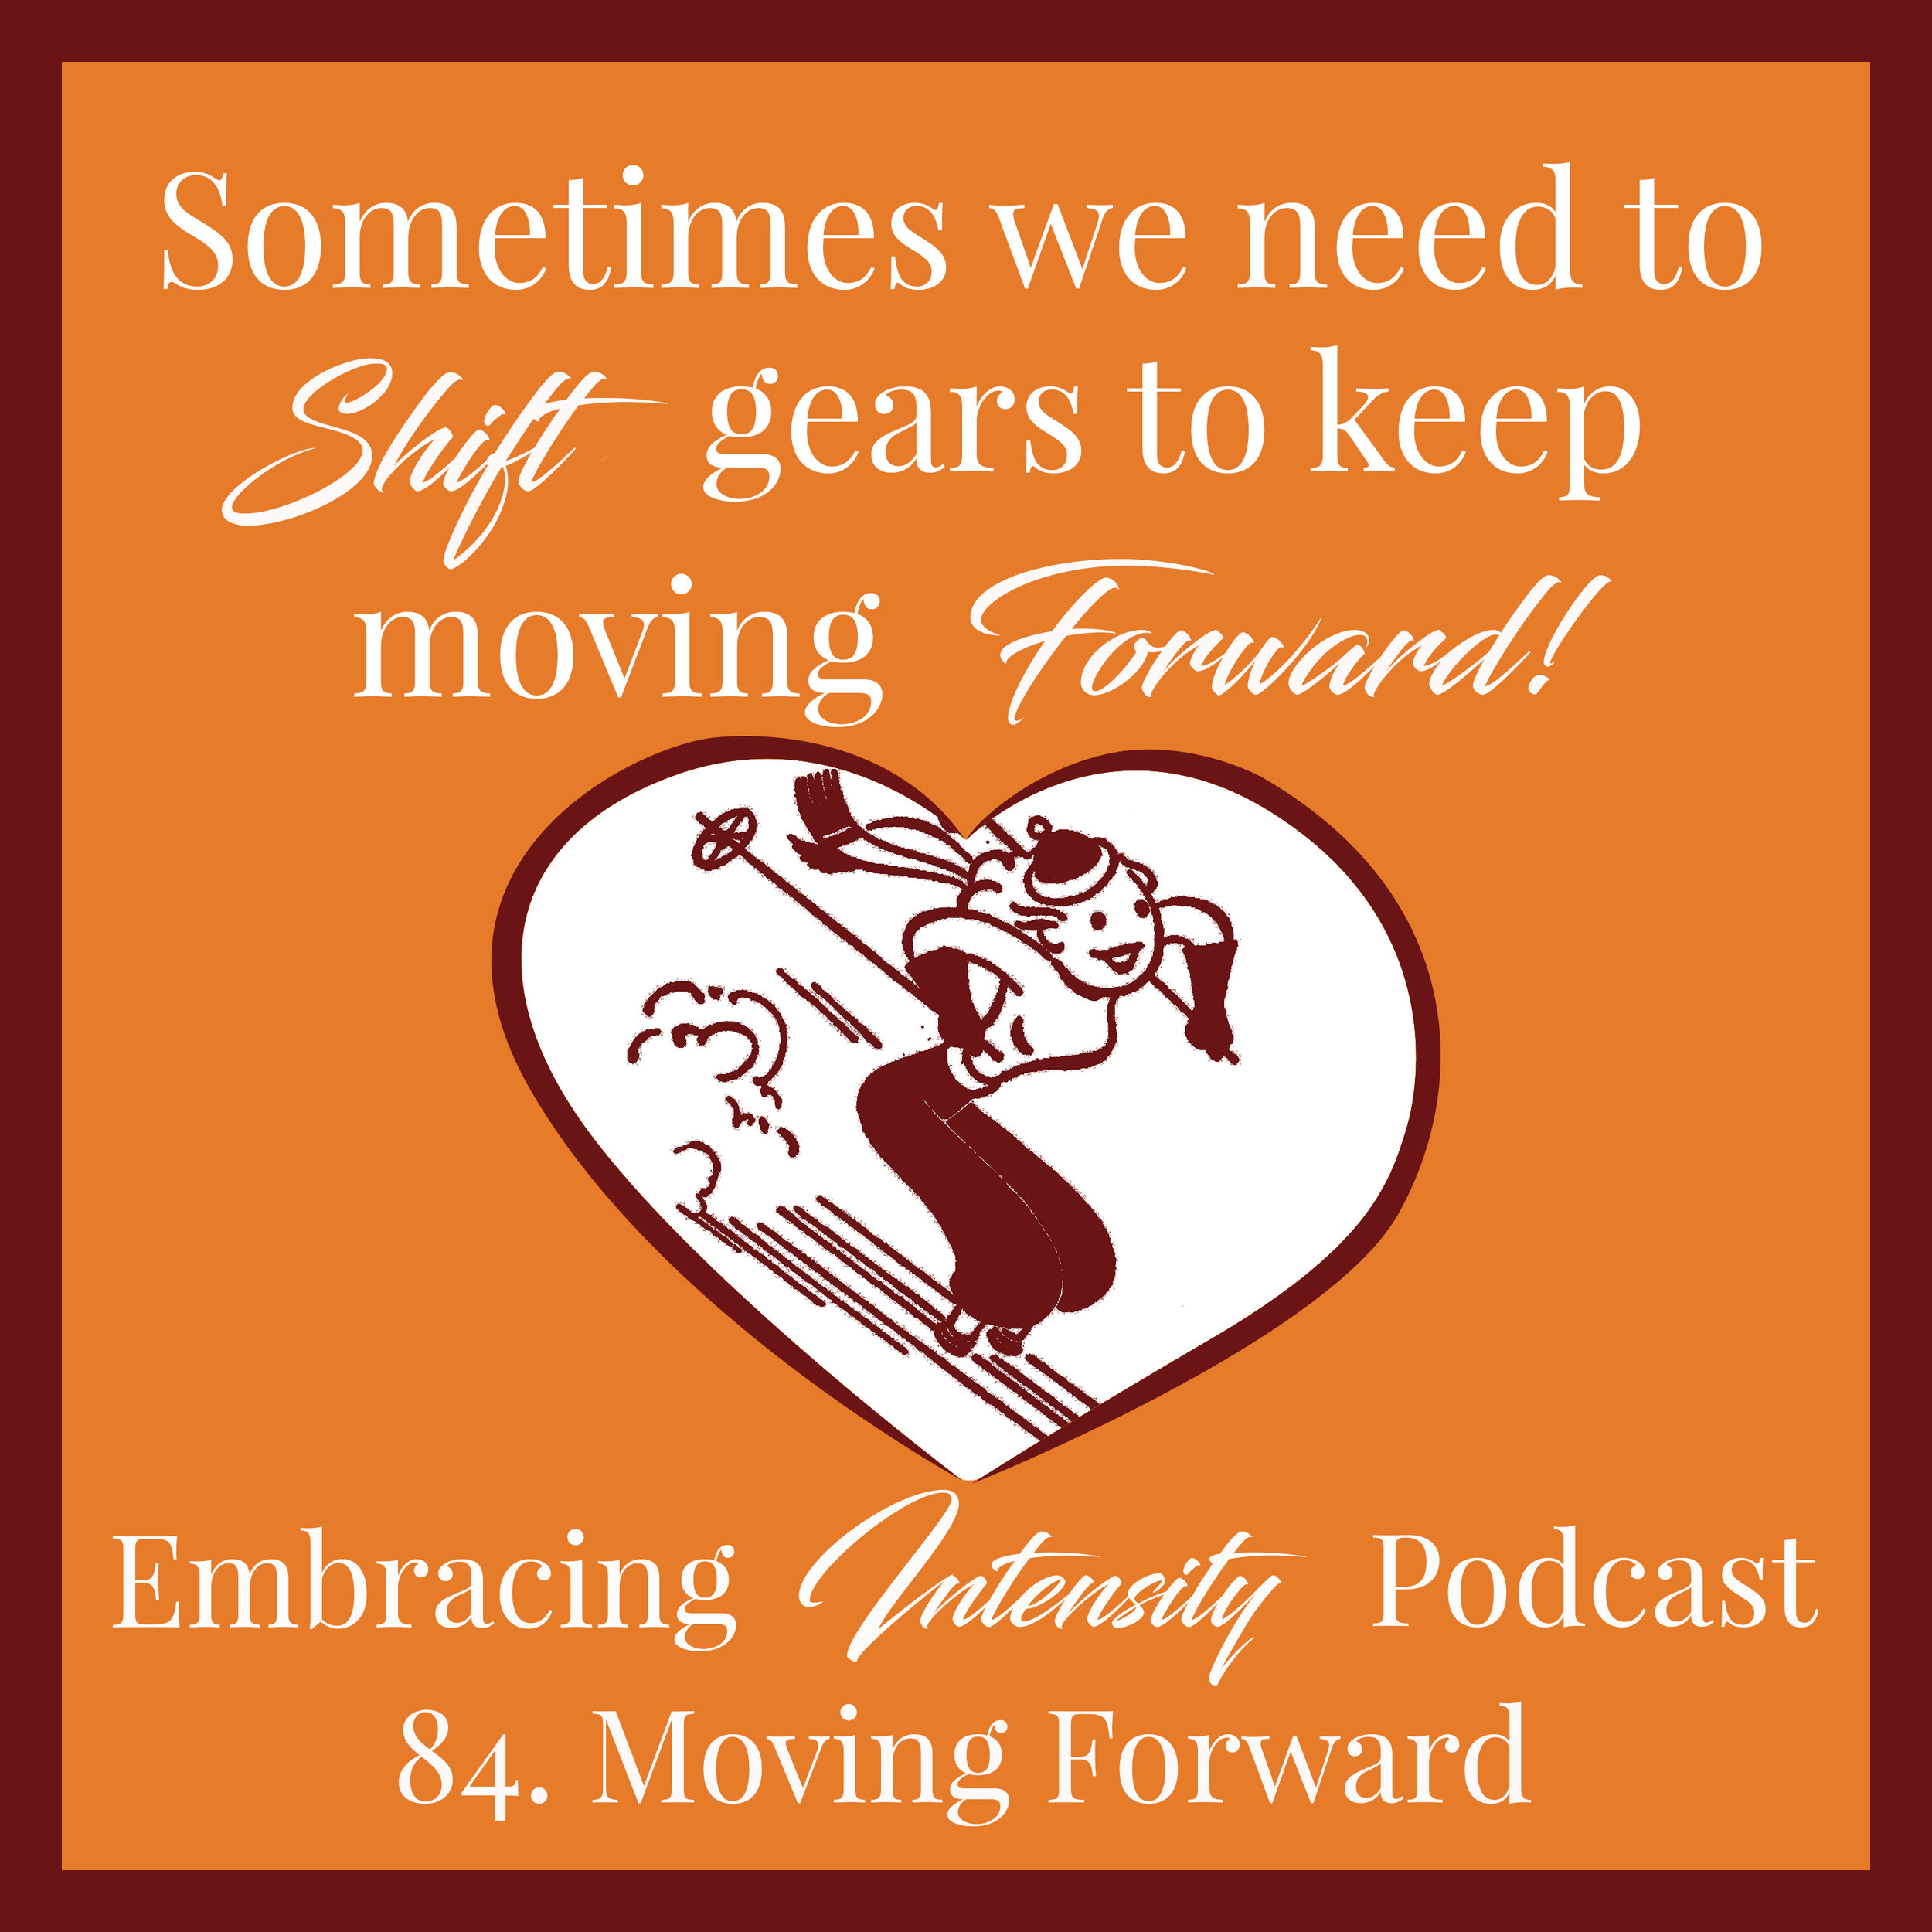 Moving Forward - Embracing Intensity Podcast